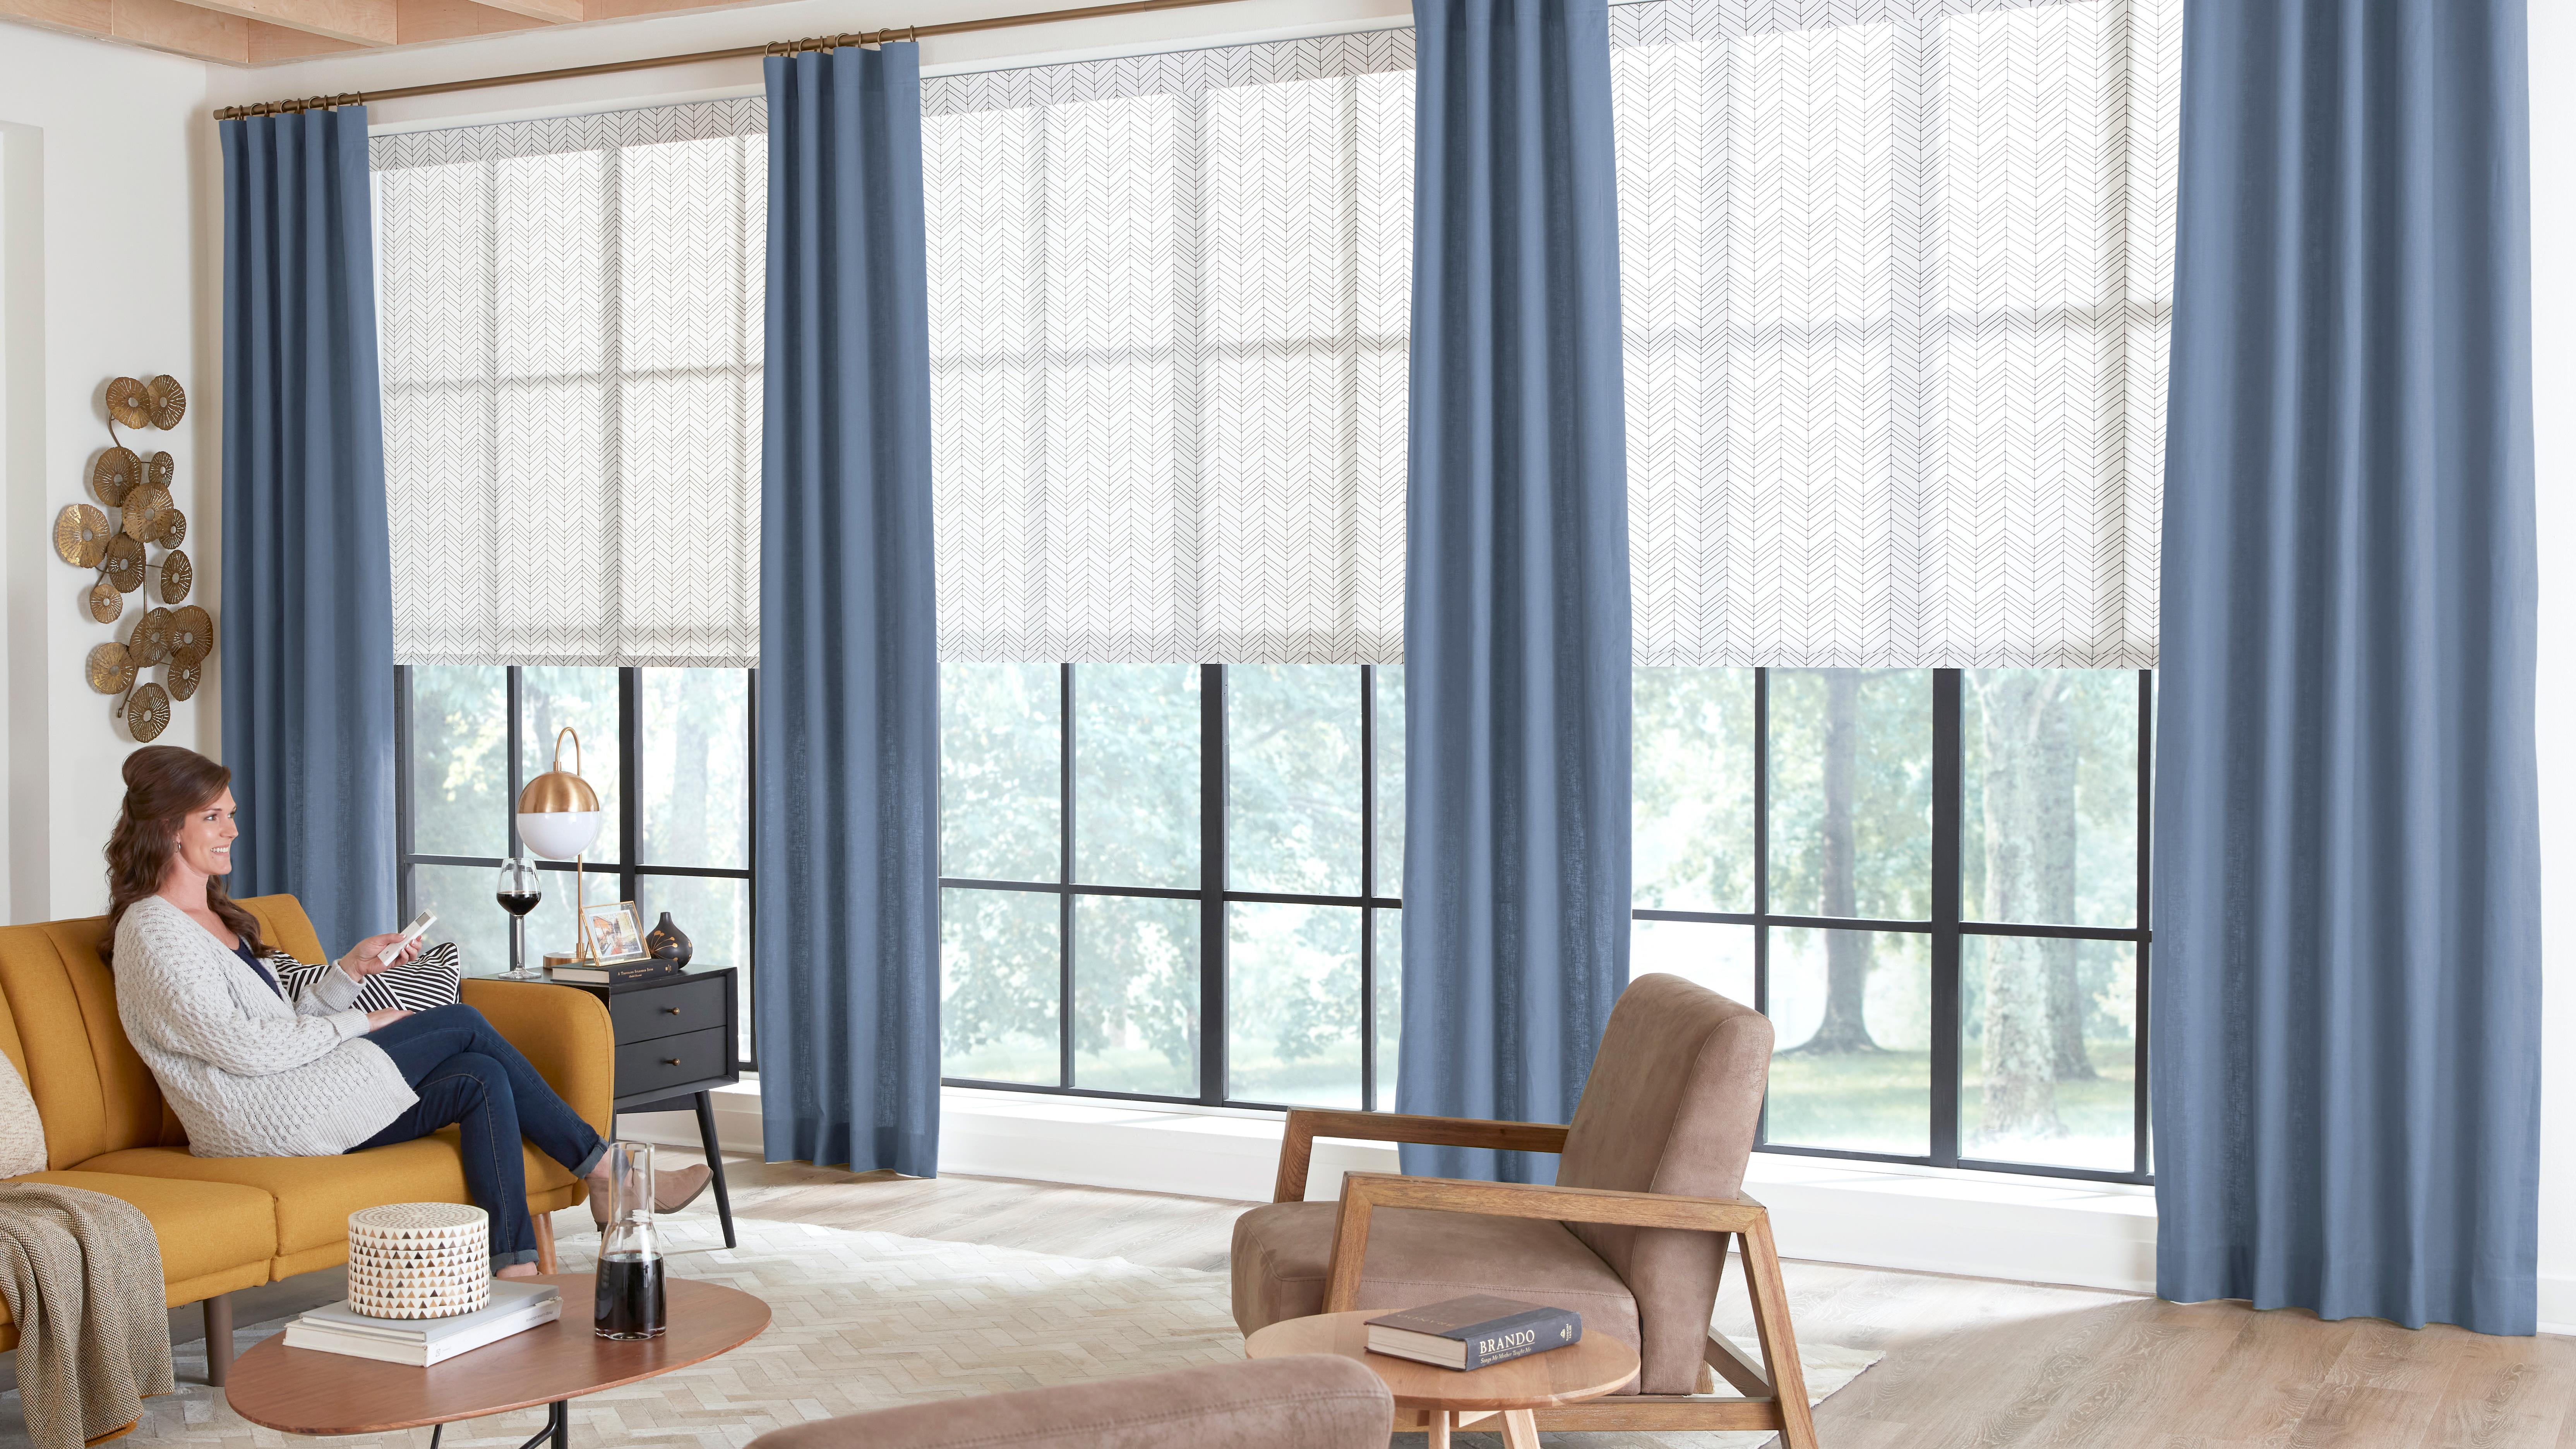 3 Day Blinds/Window Coverings                                                                                                                                                                                        